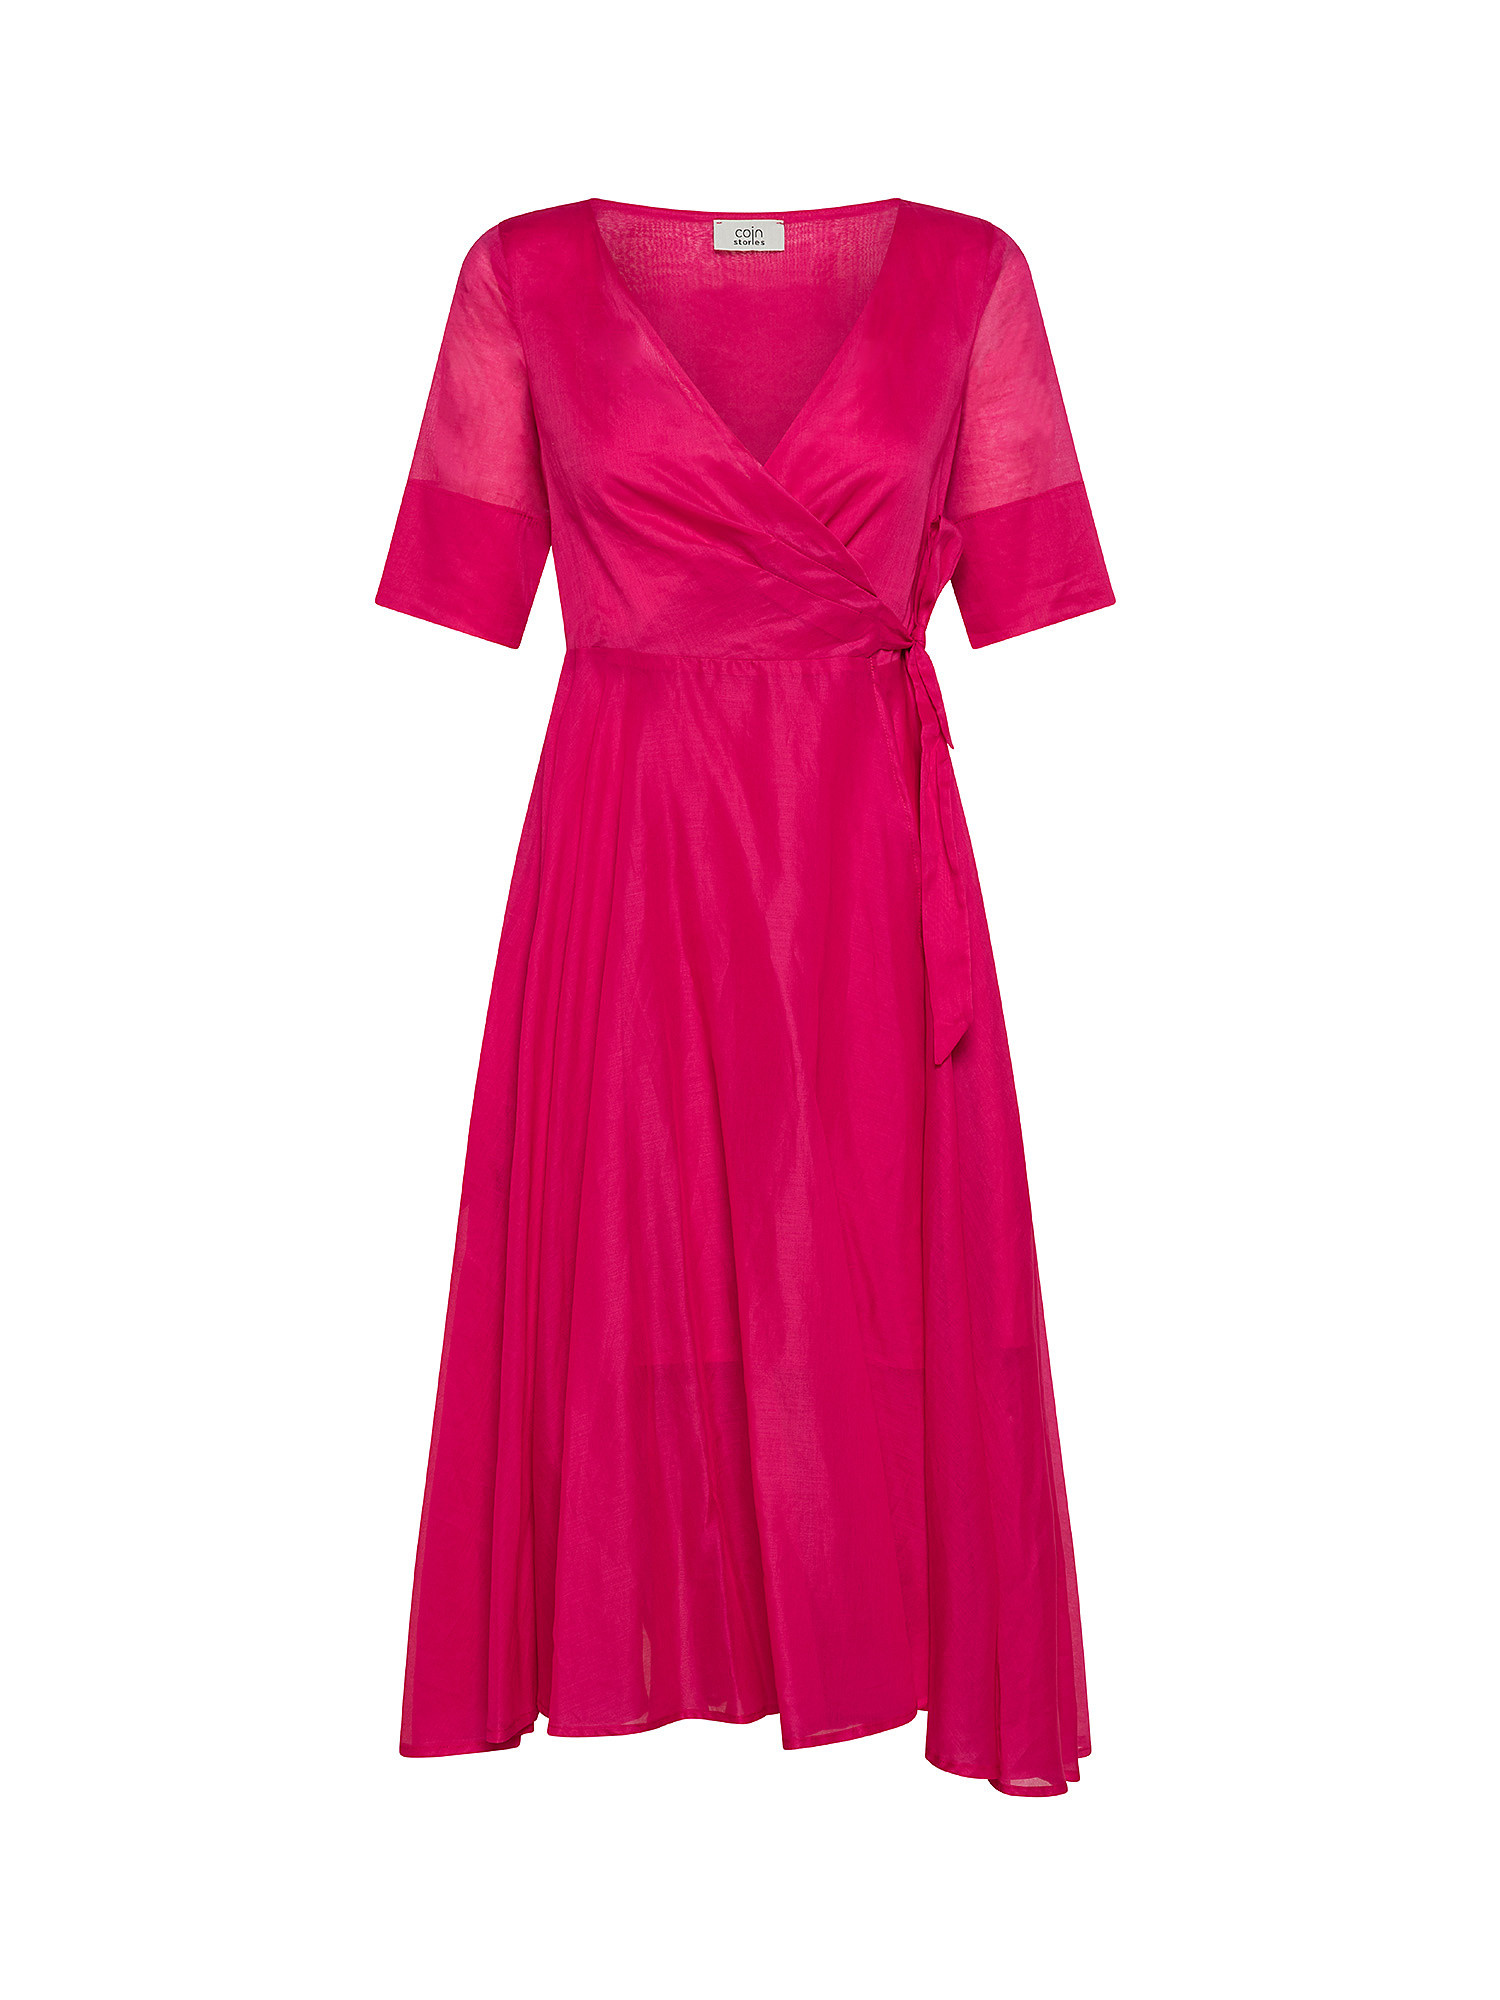 Voile dress, Pink Fuchsia, large image number 0